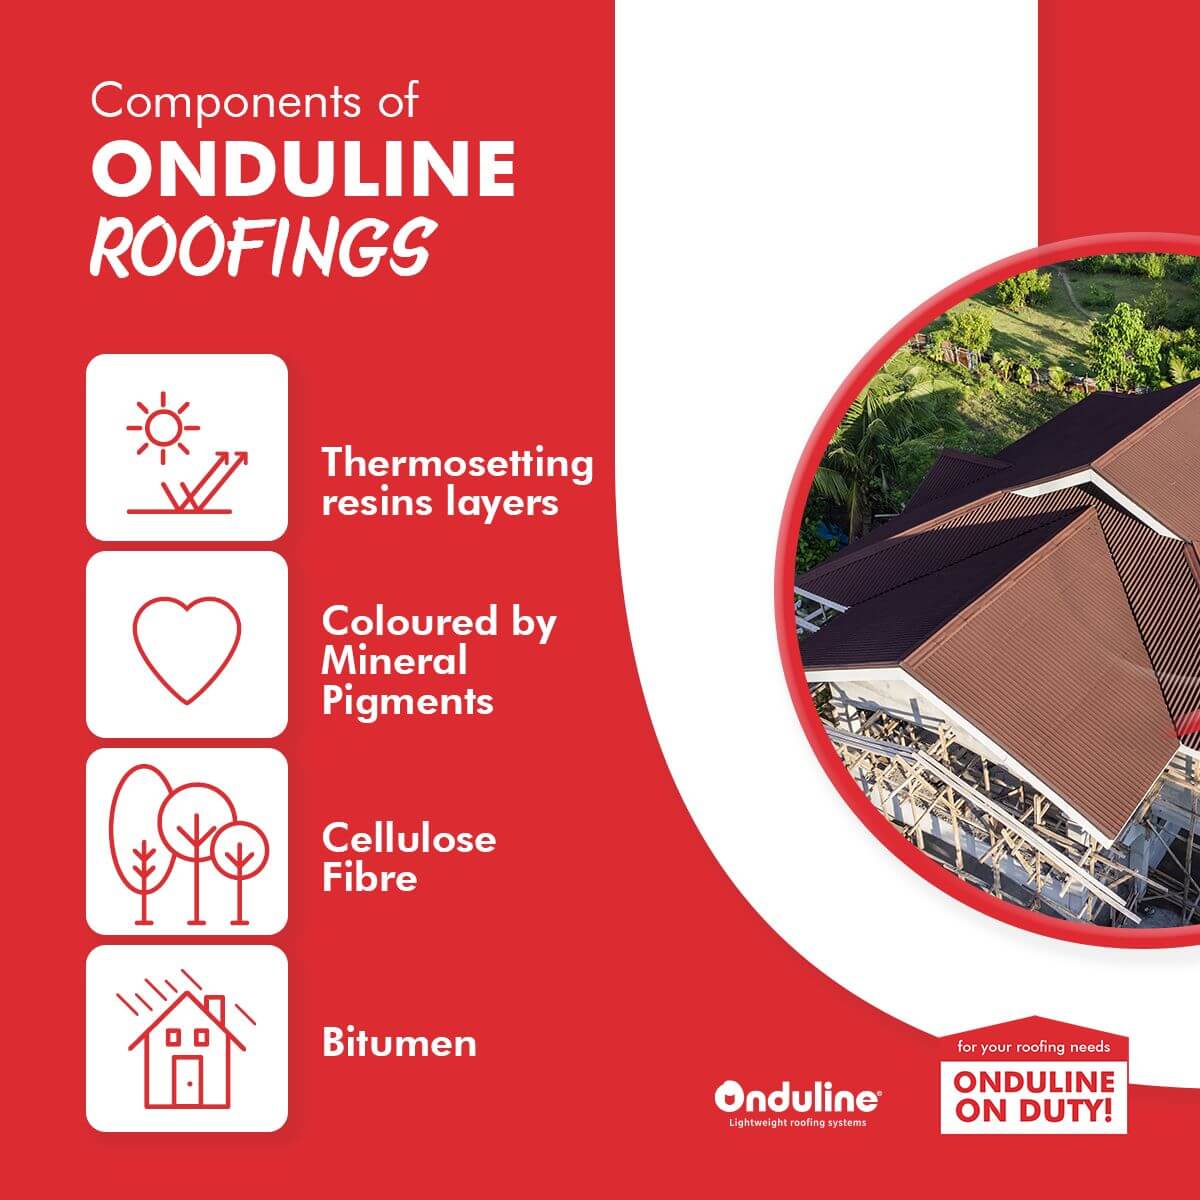 Components of Onduline Roofing